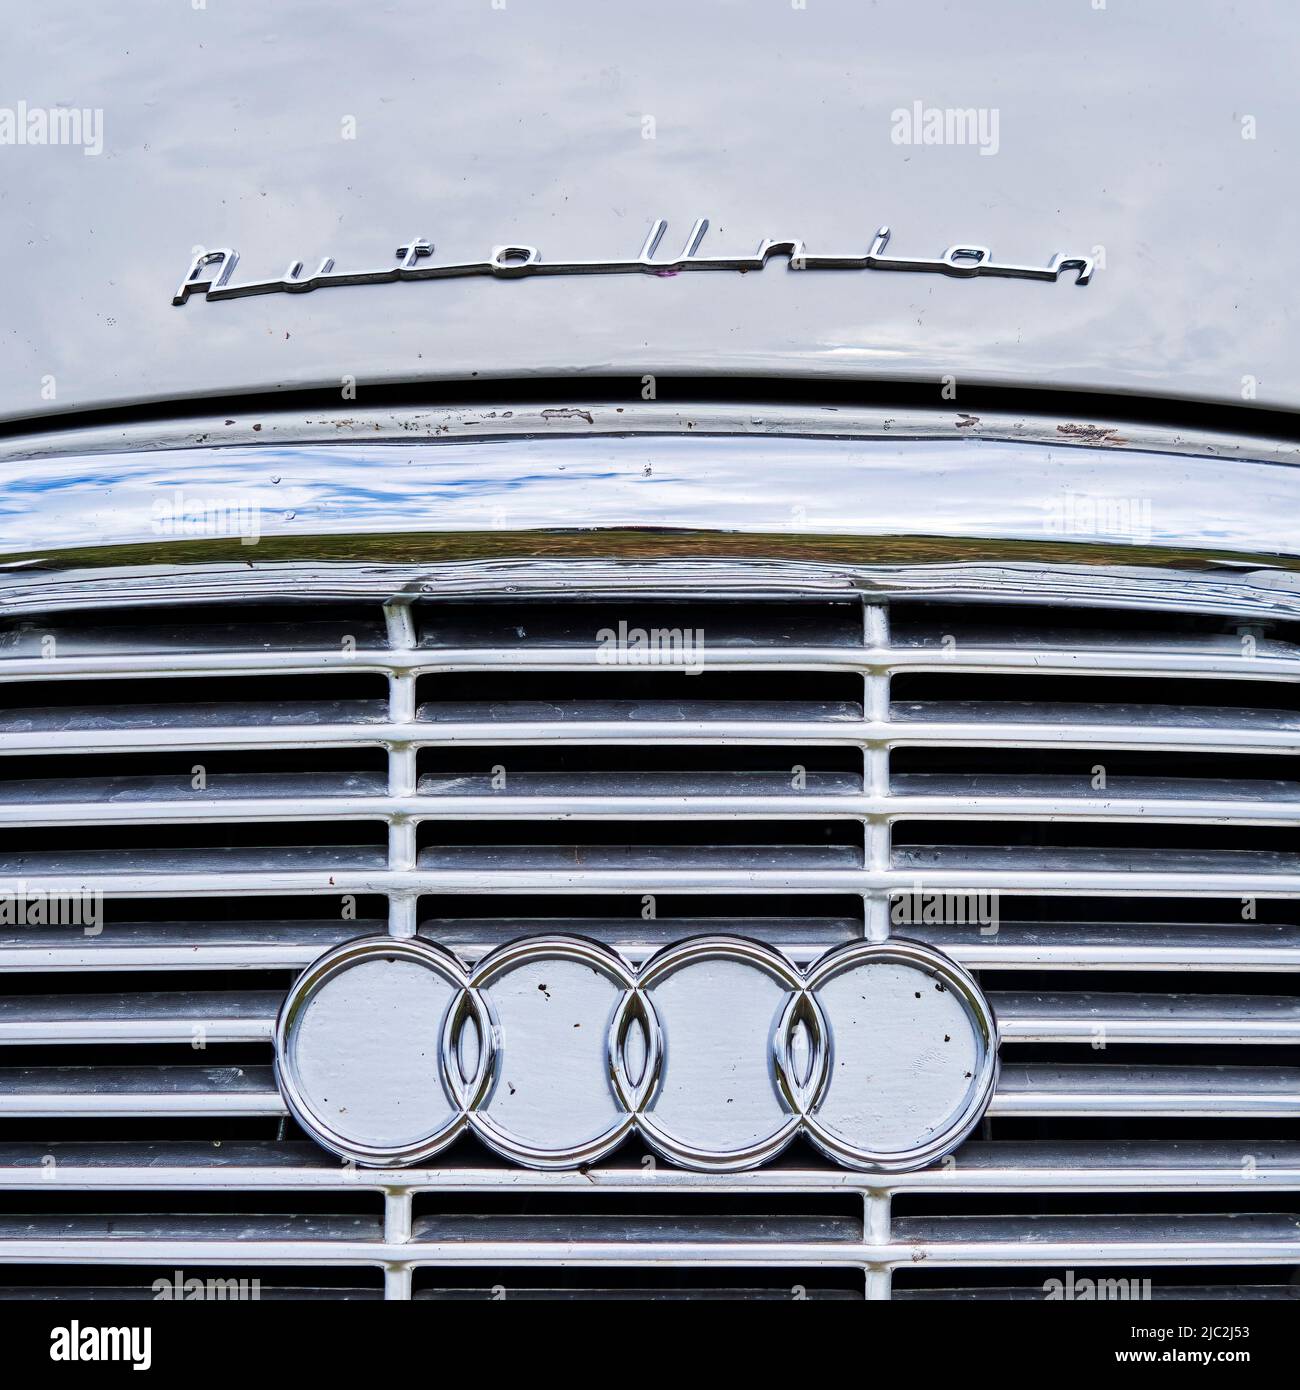 Auto Union lettering and logo of rings on the radiator grille of the classic car, the forefather of today's modern brand Audi in Hildesheim, Germany, Stock Photo